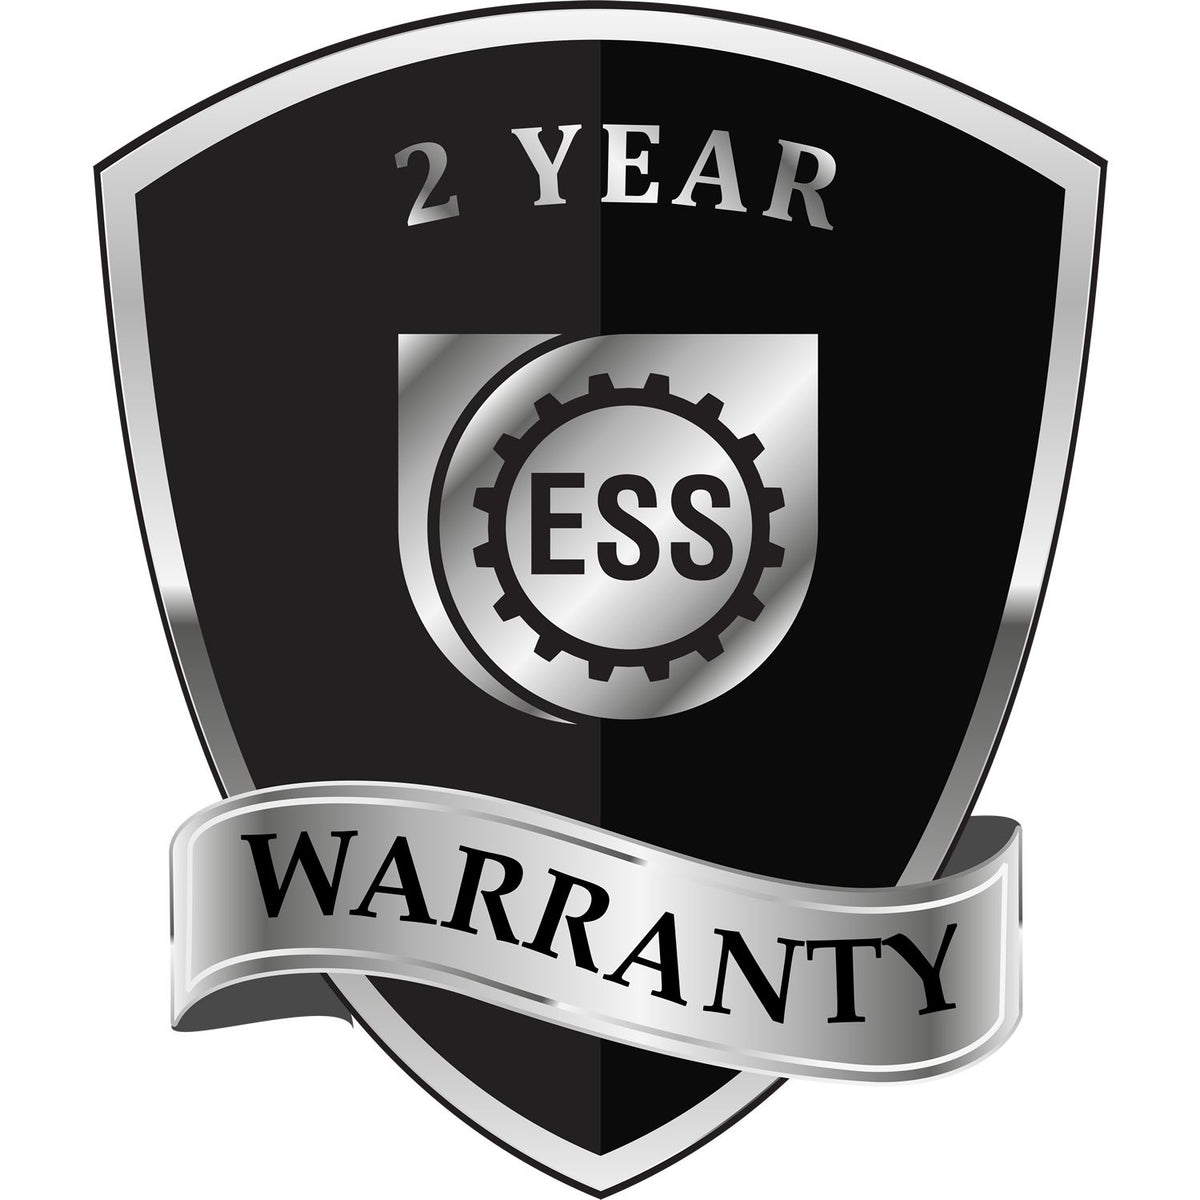 A black and silver badge or emblem showing warranty information for the Hybrid New Hampshire Land Surveyor Seal